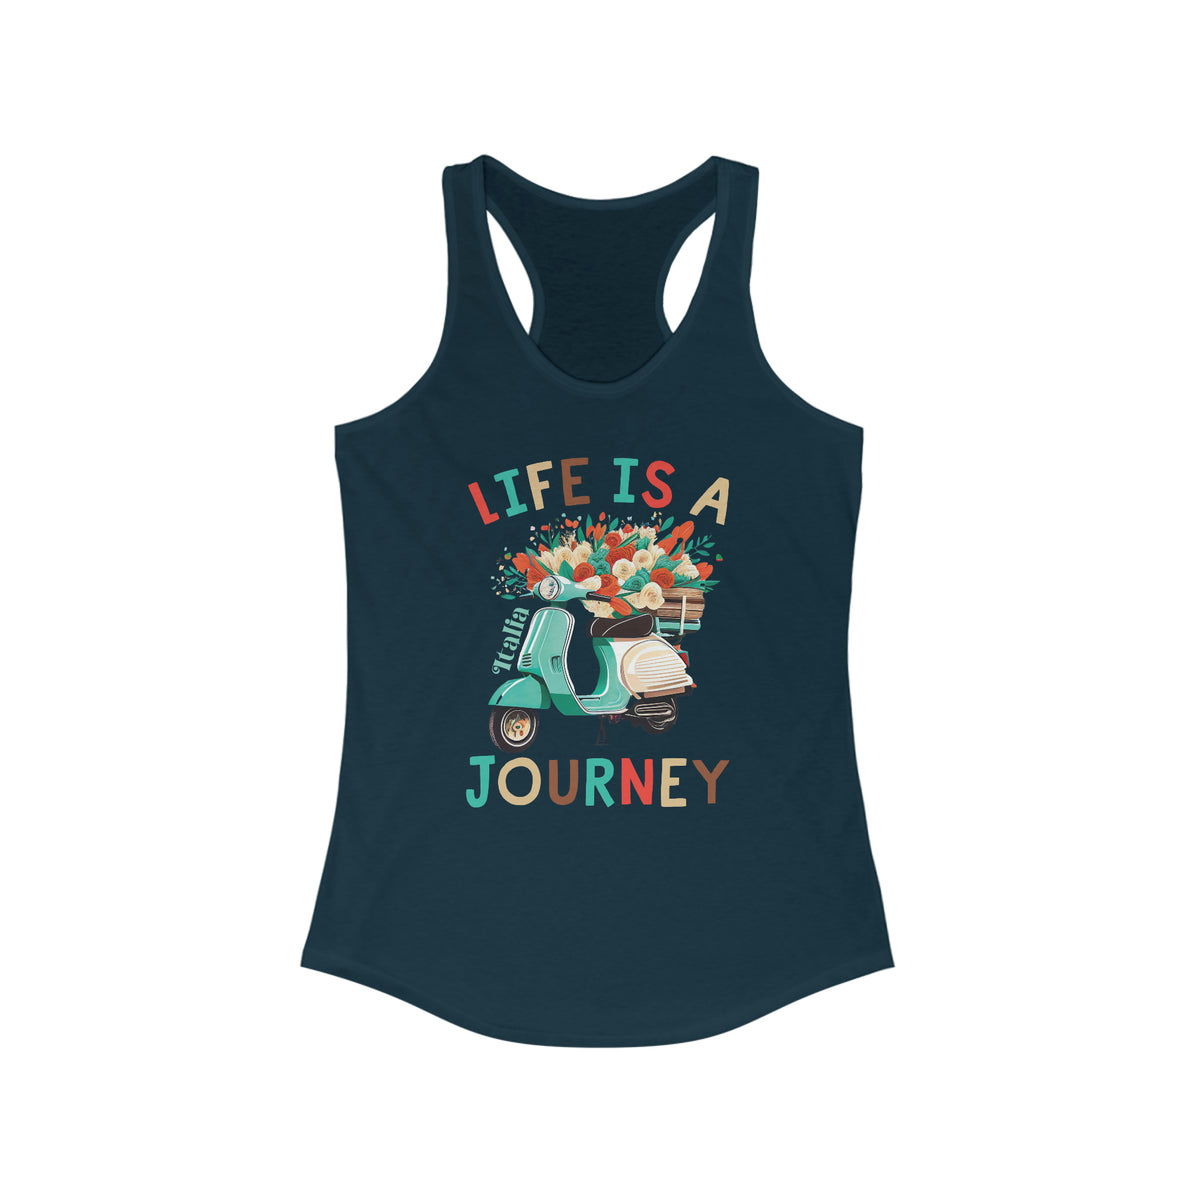 Life Is A Journey Italy Shirt | Italy Travel Gifts | Italy Vacation Shirt | Gift For Her | Women's Slim-fit Racerback Tank Top